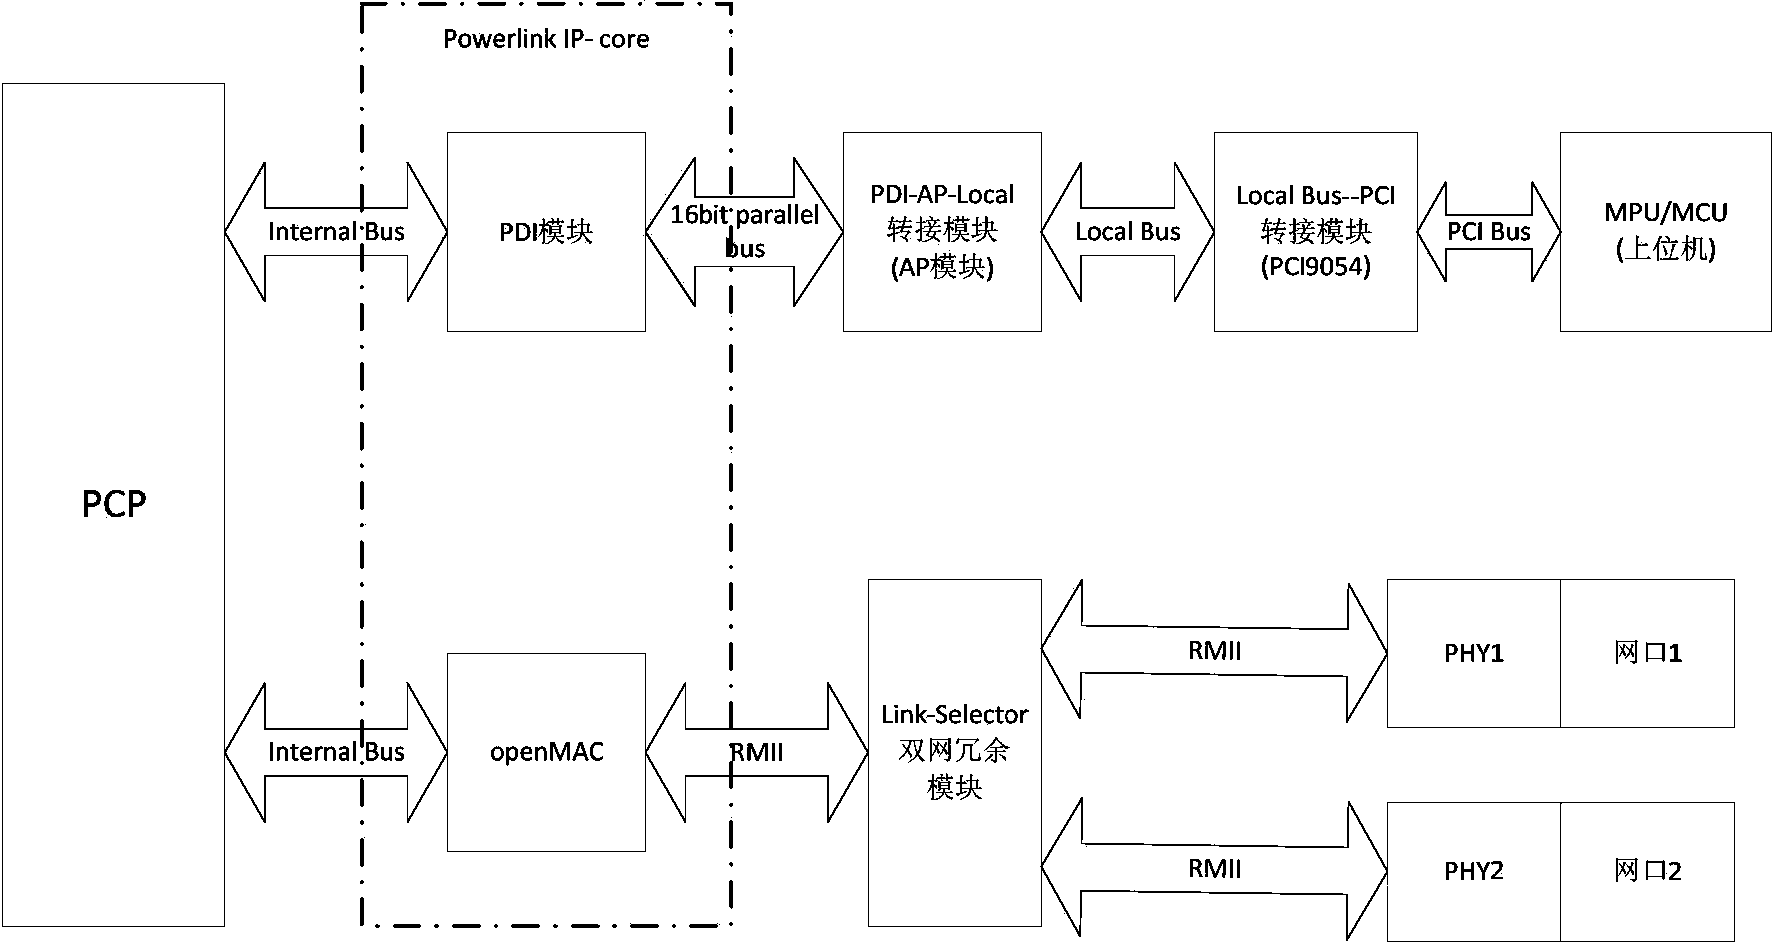 Inter-board communication component based on POWERLINK technology